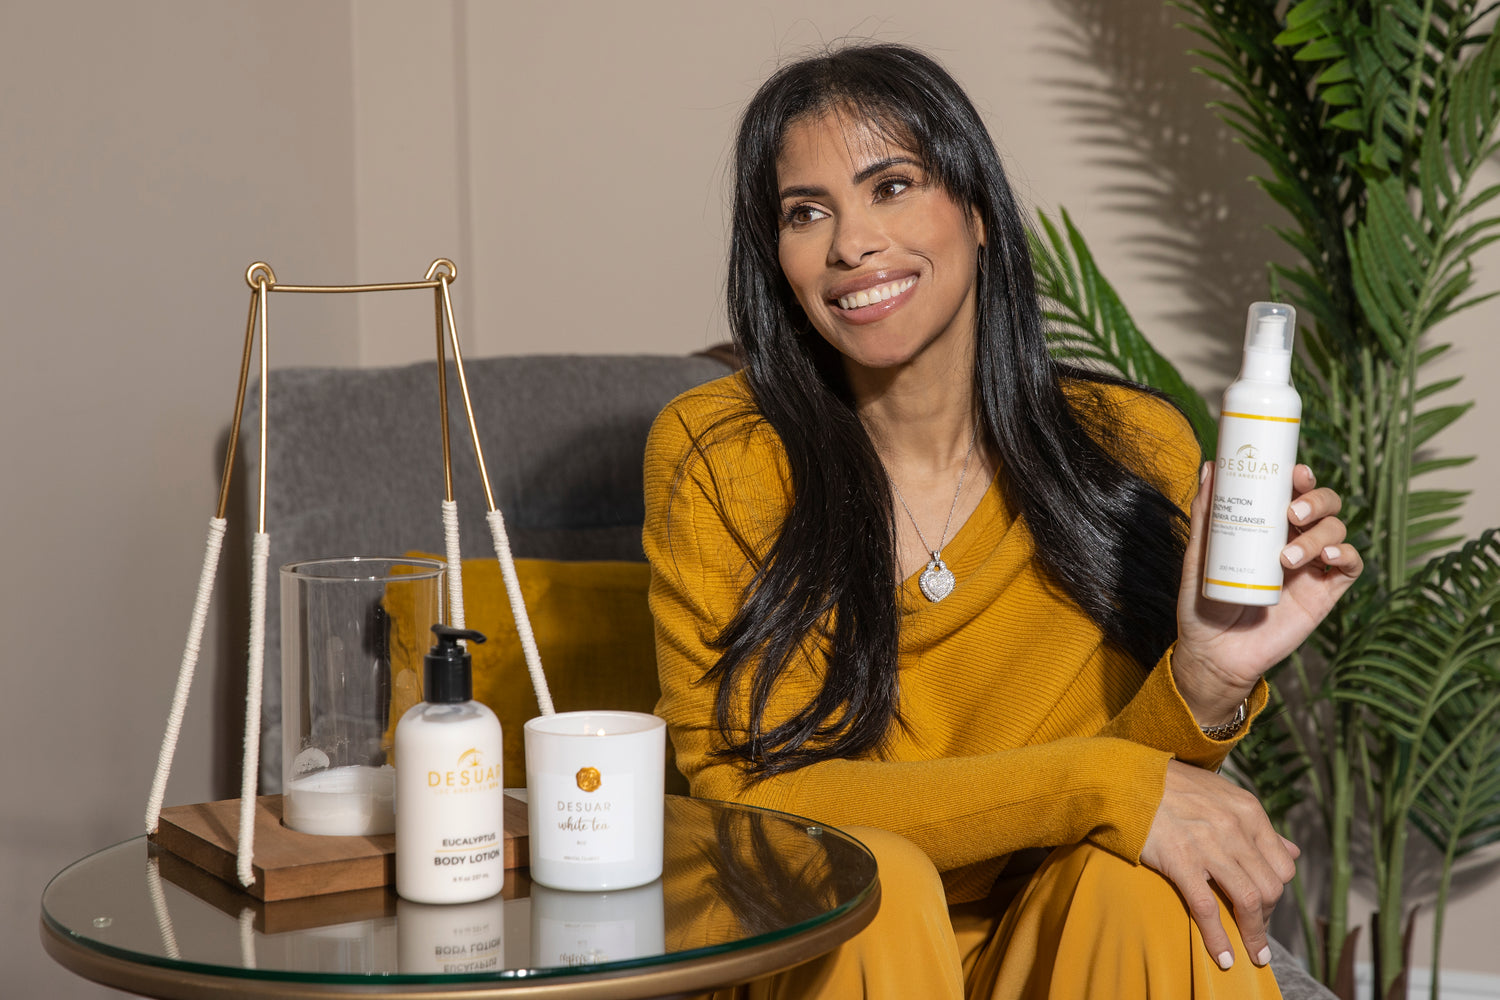 DESUAR Spa founder Deisy Suarez with a few of her products